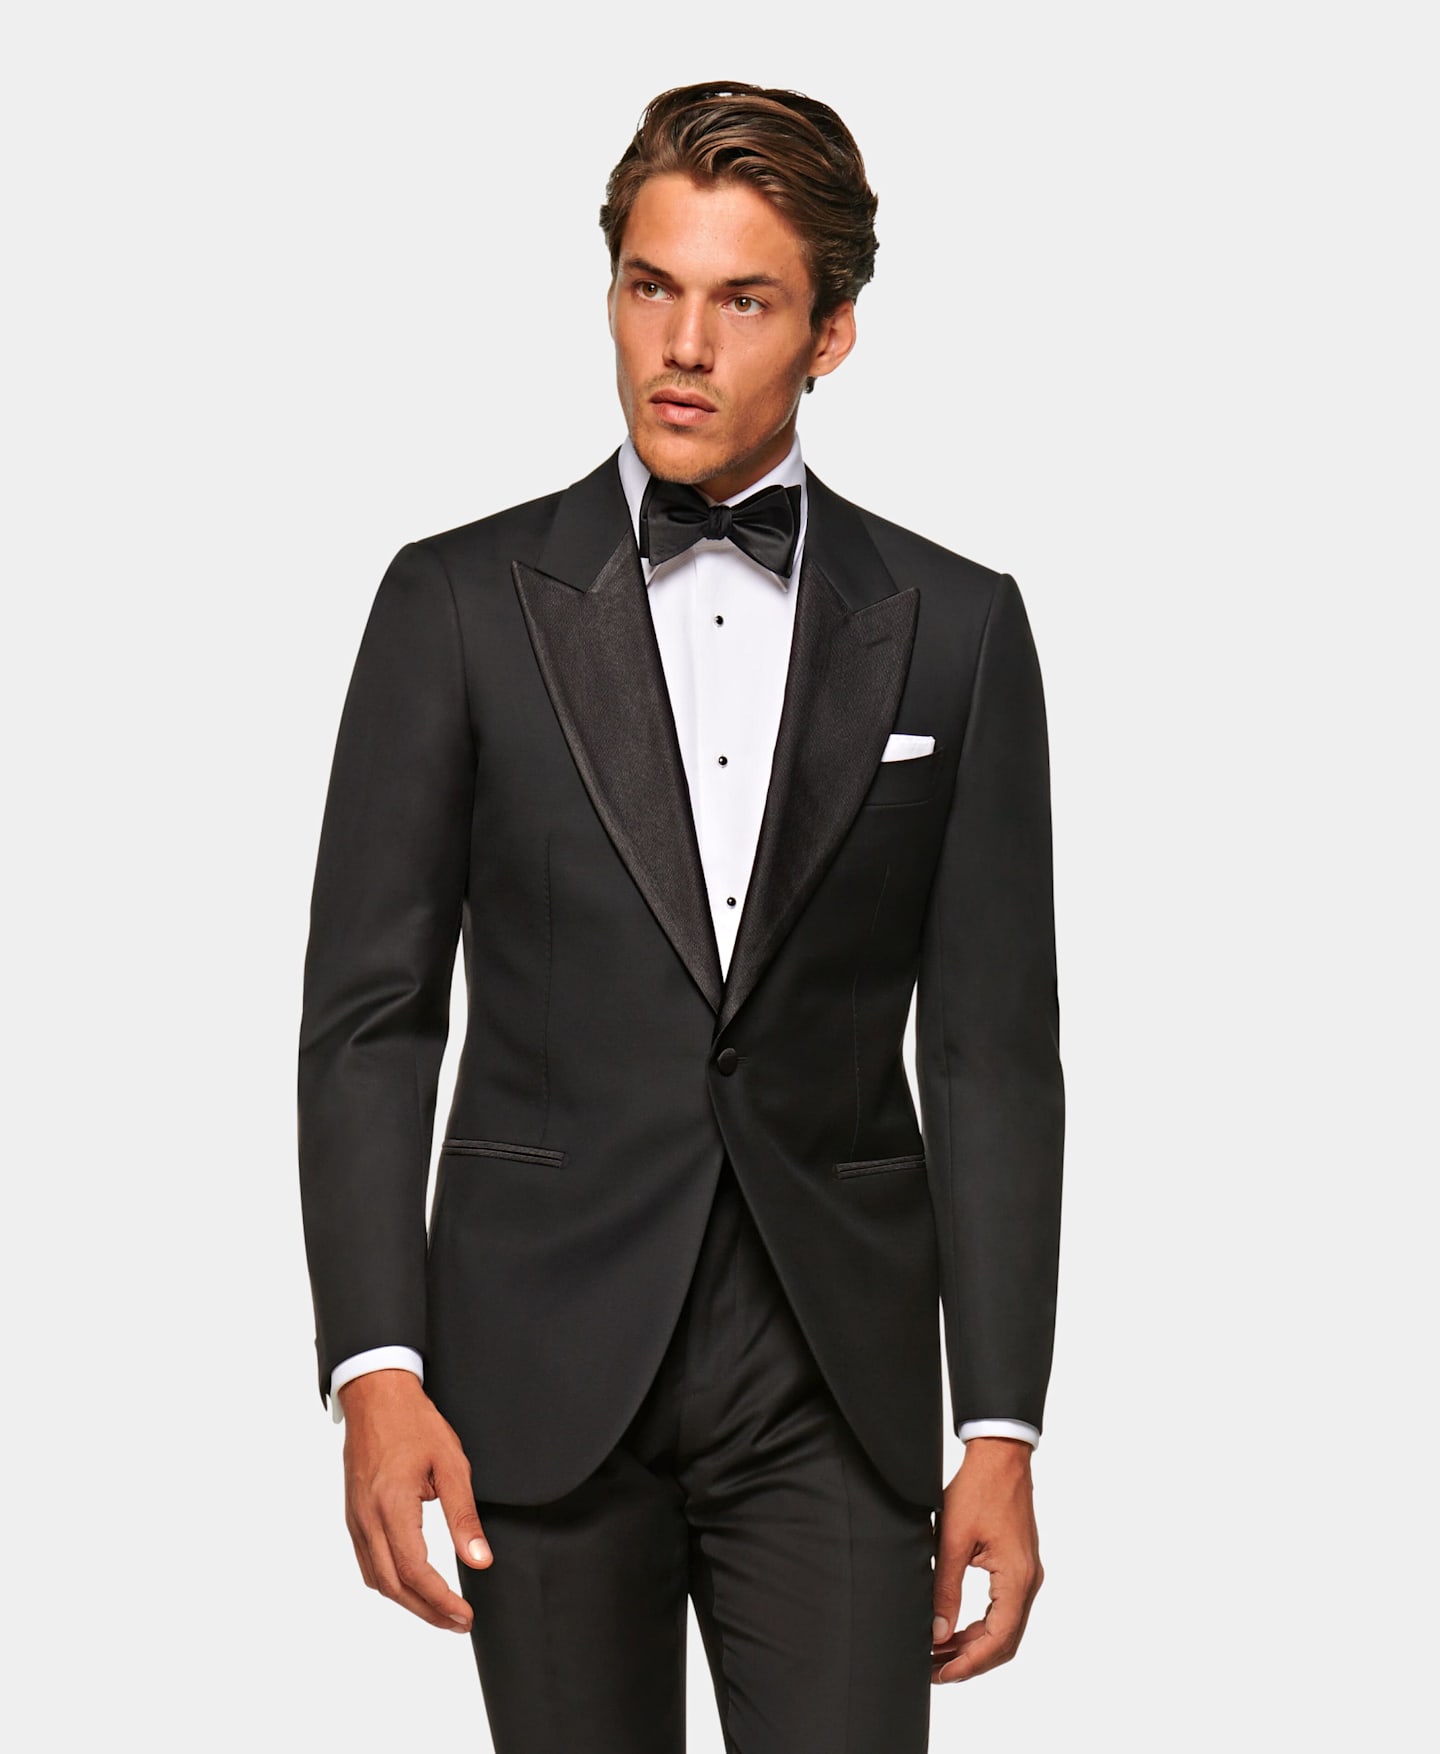 Black-tie Guide | Timeless classics to modern standouts | Suitsupply ...